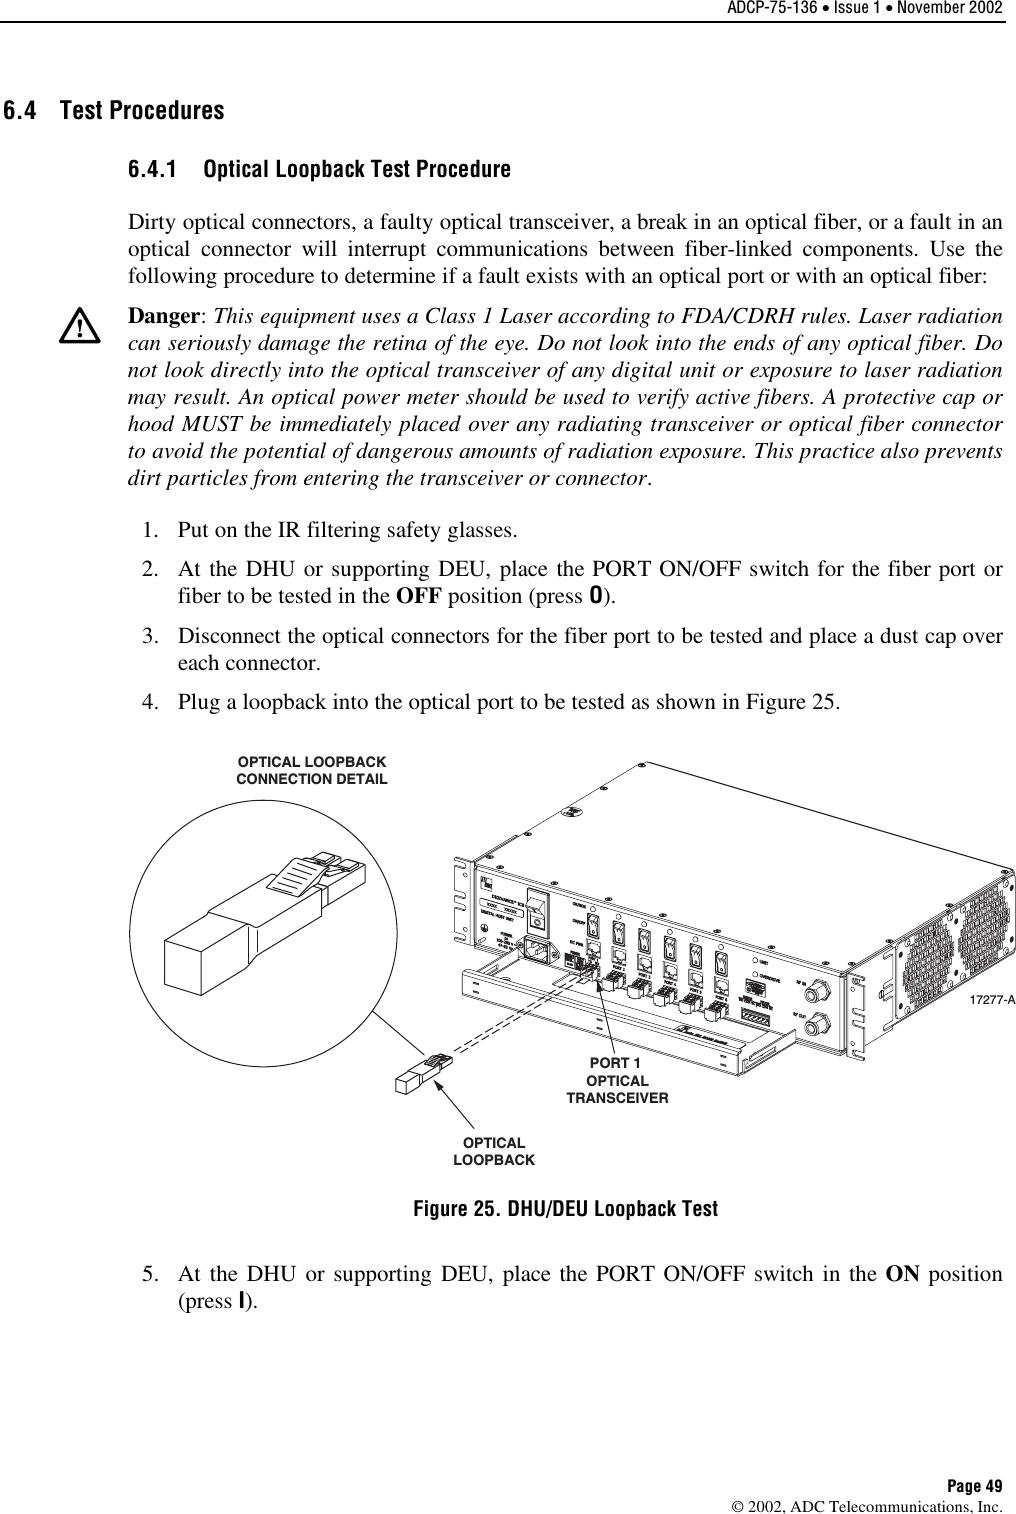 ADCP-75-136 • Issue 1 • November 2002 Page 49 ©2002, ADC Telecommunications, Inc.6.4 Test Procedures 6.4.1  Optical Loopback Test Procedure Dirty optical connectors, afaulty optical transceiver, abreak in an optical fiber, or a fault in anoptical connector will interrupt communications between fiber-linked components. Use thefollowing procedure to determine if afault exists with an optical port or with an optical fiber:Danger:This equipment uses aClass 1Laser according to FDA/CDRH rules. Laser radiationcan seriously damage the retina of the eye. Do not look into the ends of any optical fiber. Donot look directly into the optical transceiver of any digital unit or exposure to laser radiationmay result. An optical power meter should be used to verify active fibers. Aprotective cap orhood MUST be immediately placed over any radiating transceiver or optical fiber connectorto avoid the potential of dangerous amounts of radiation exposure. This practice also preventsdirt particles from entering the transceiver or connector.1. Put on the IR filtering safety glasses.2. At the DHU or supporting DEU, place the PORT ON/OFF switch for the fiber port orfiber to be tested in the OFF position (press O).3. Disconnect the optical connectors for the fiber port to be tested and place adust cap overeach connector.4. Plug aloopback into the optical port to be tested as shown in Figure 25.17277-AOPTICAL LOOPBACKCONNECTION DETAILPORT 1 OPTICALTRANSCEIVEROPTICALLOOPBACKFigure 25. DHU/DEU Loopback Test 5. At the DHU or supporting DEU, place the PORT ON/OFF switch in the ON position(press I).